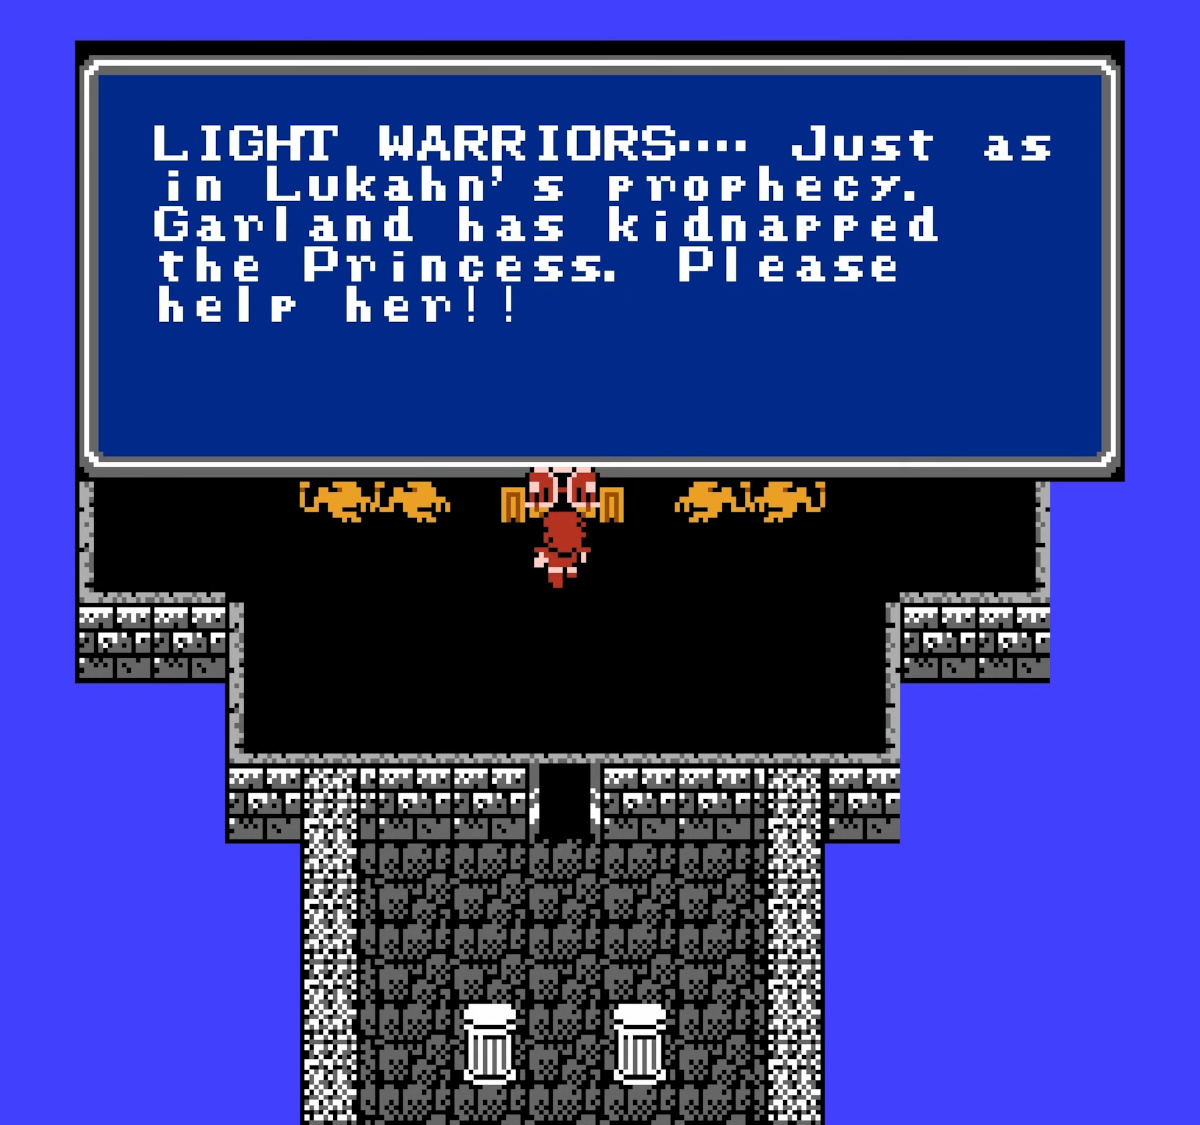 The Light Warriors (represented by Fighter) in Final Fantasy